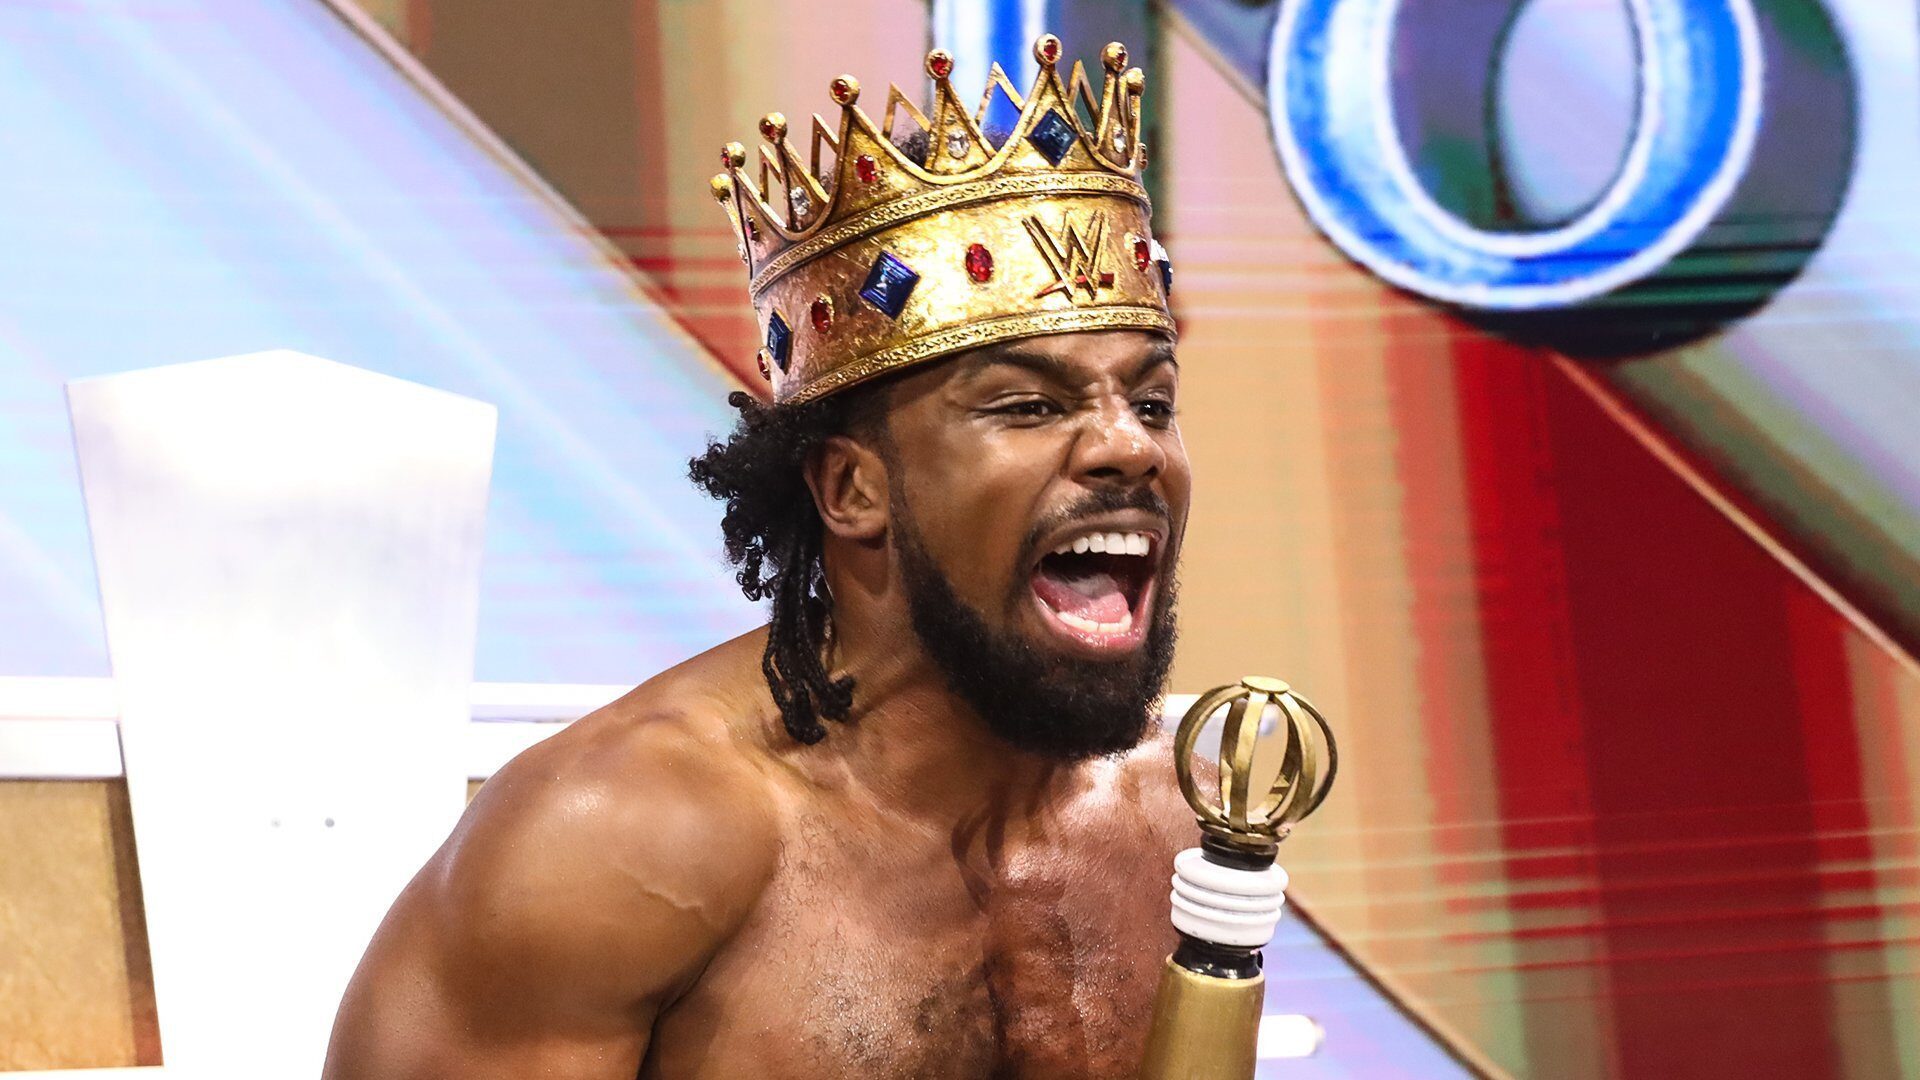 King Woods Pulled From Royal Rumble 2022